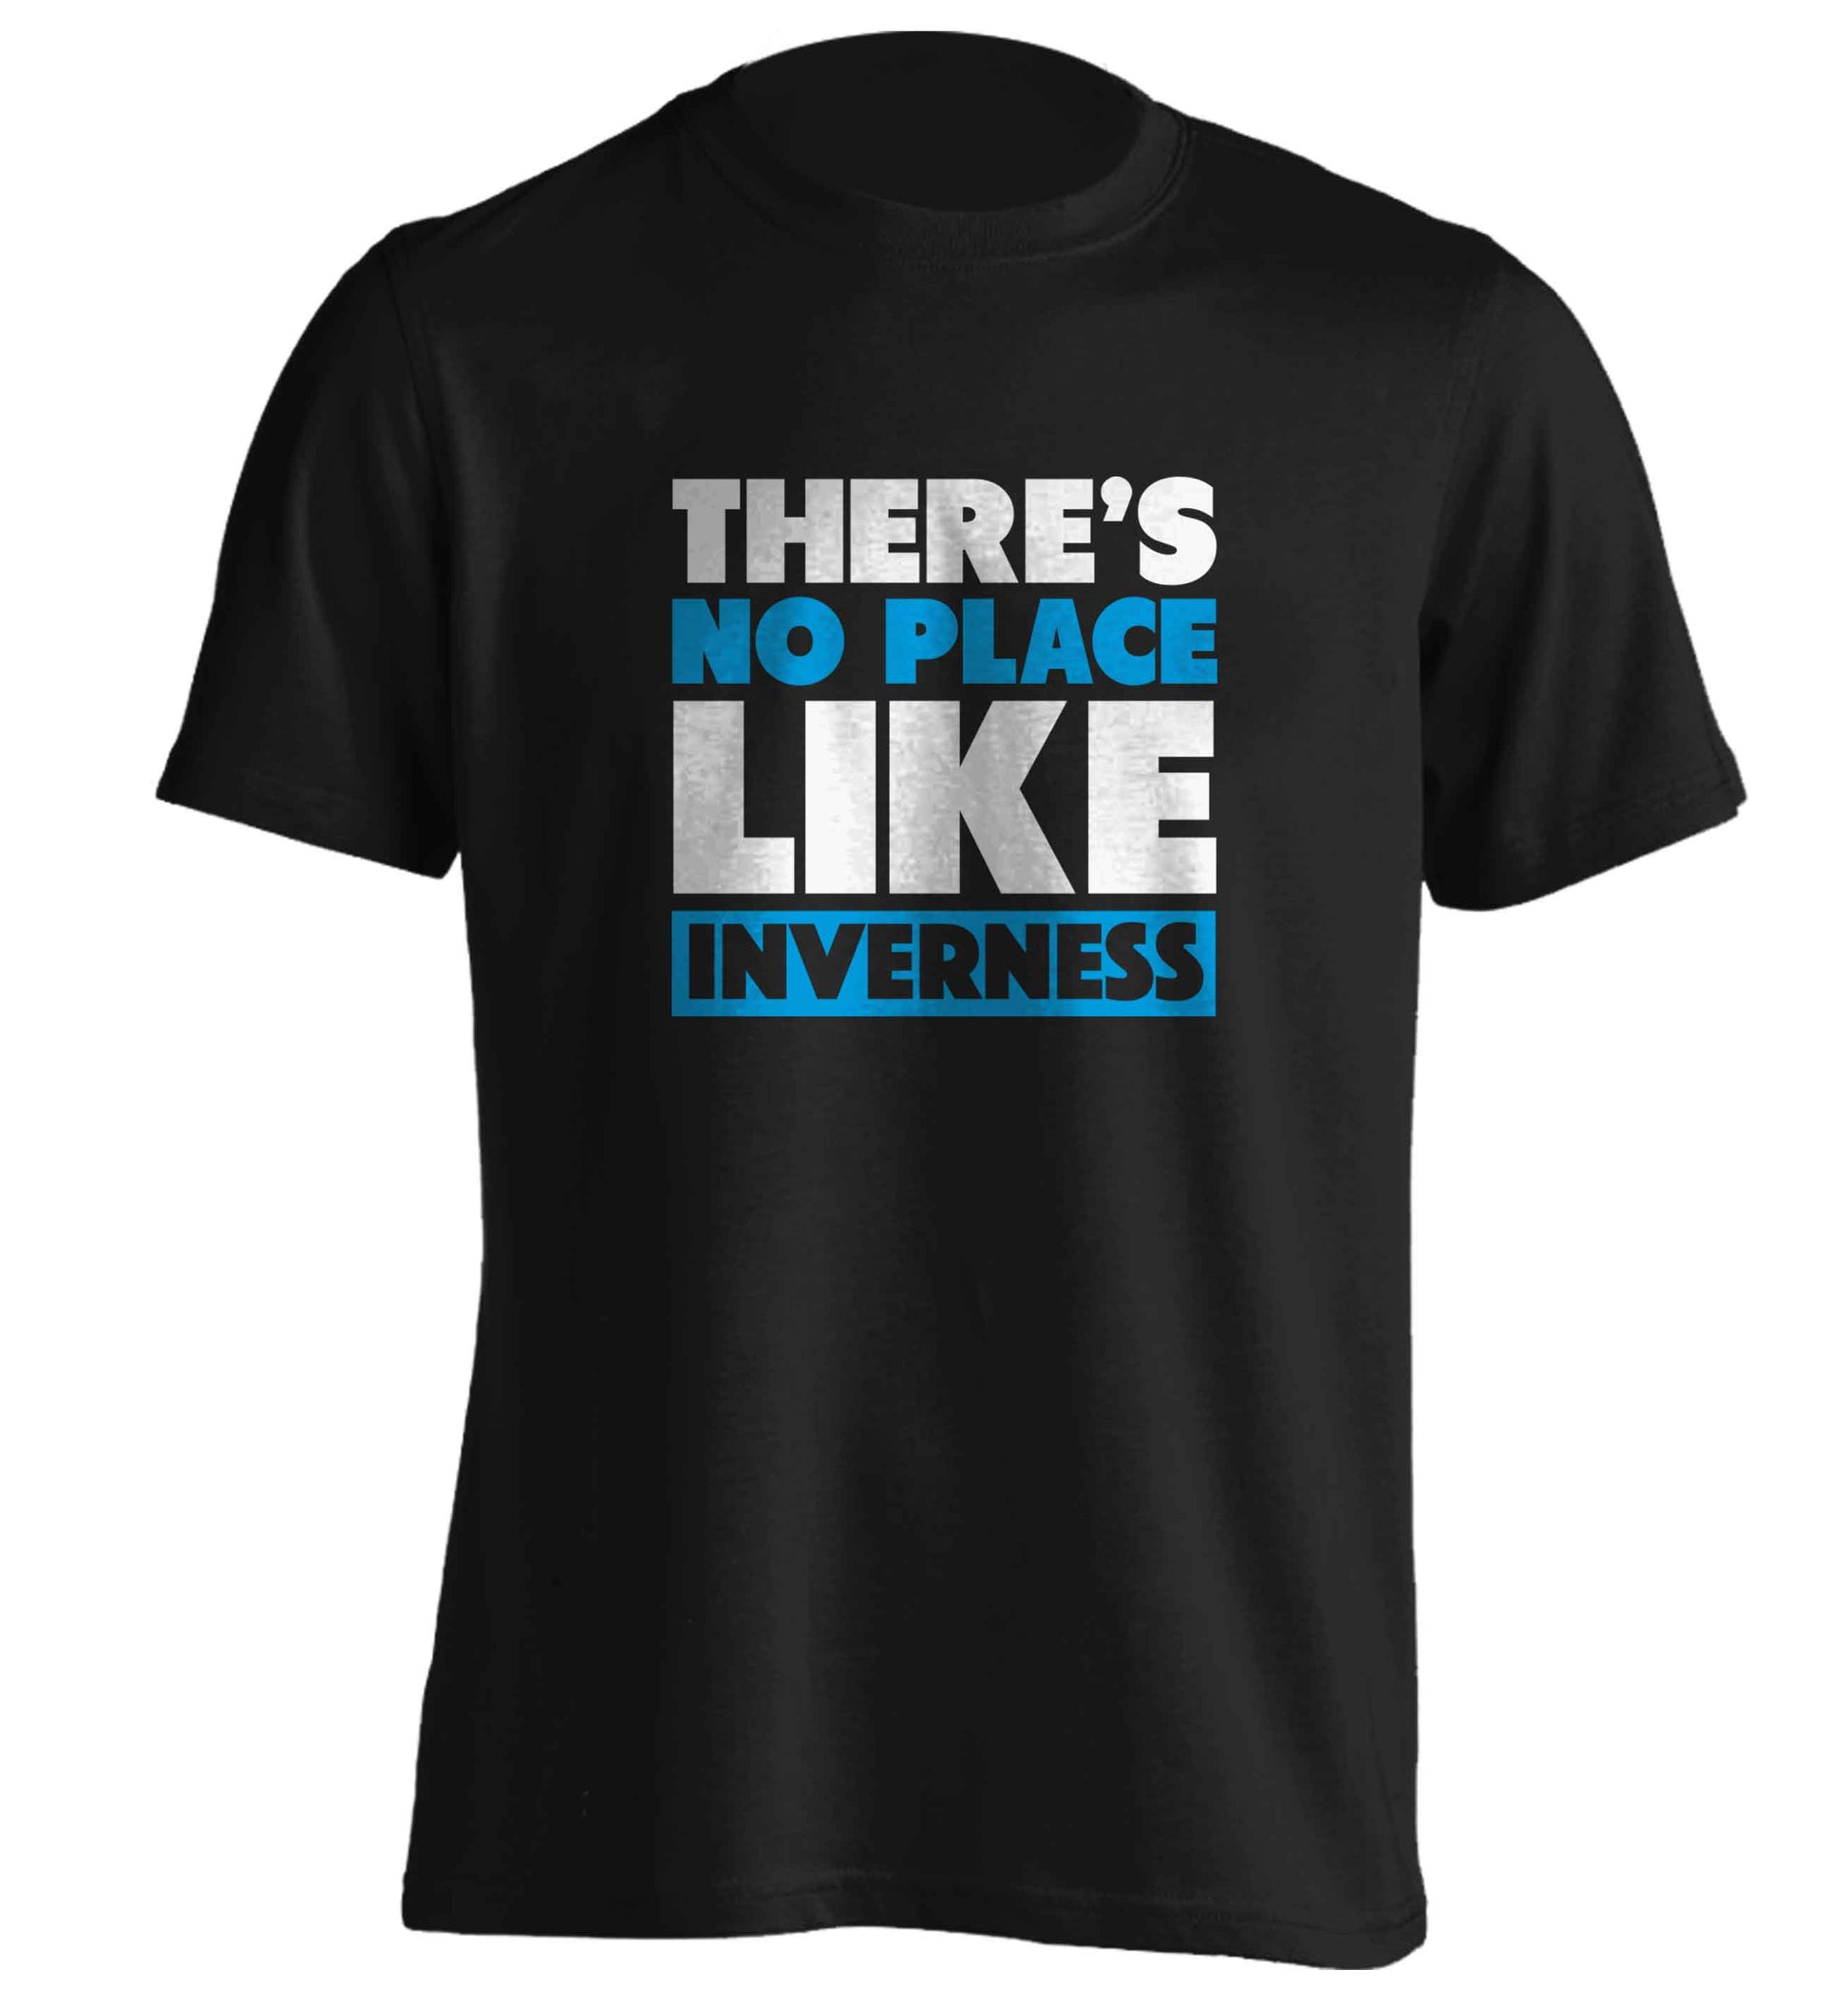 There's no place like Inverness adults unisex black Tshirt 2XL